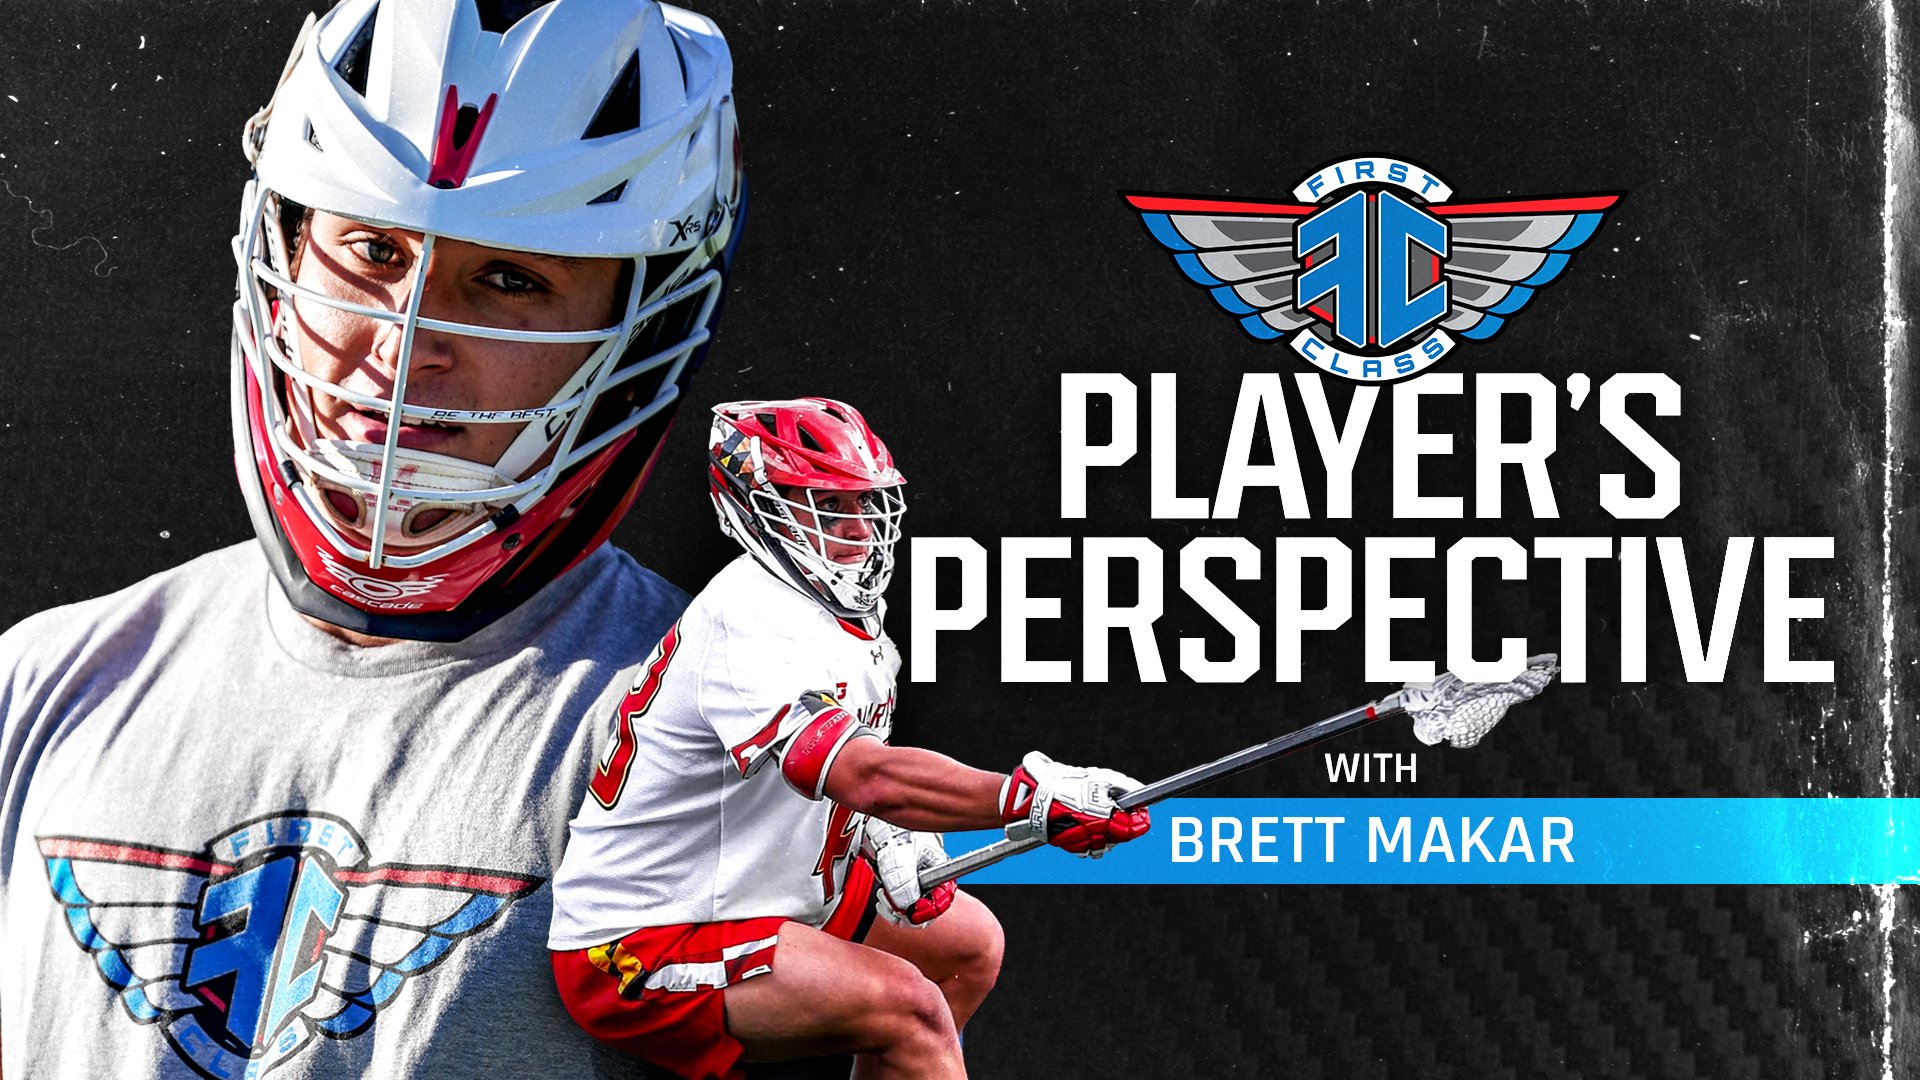 Behind the Cage with Brett Makar